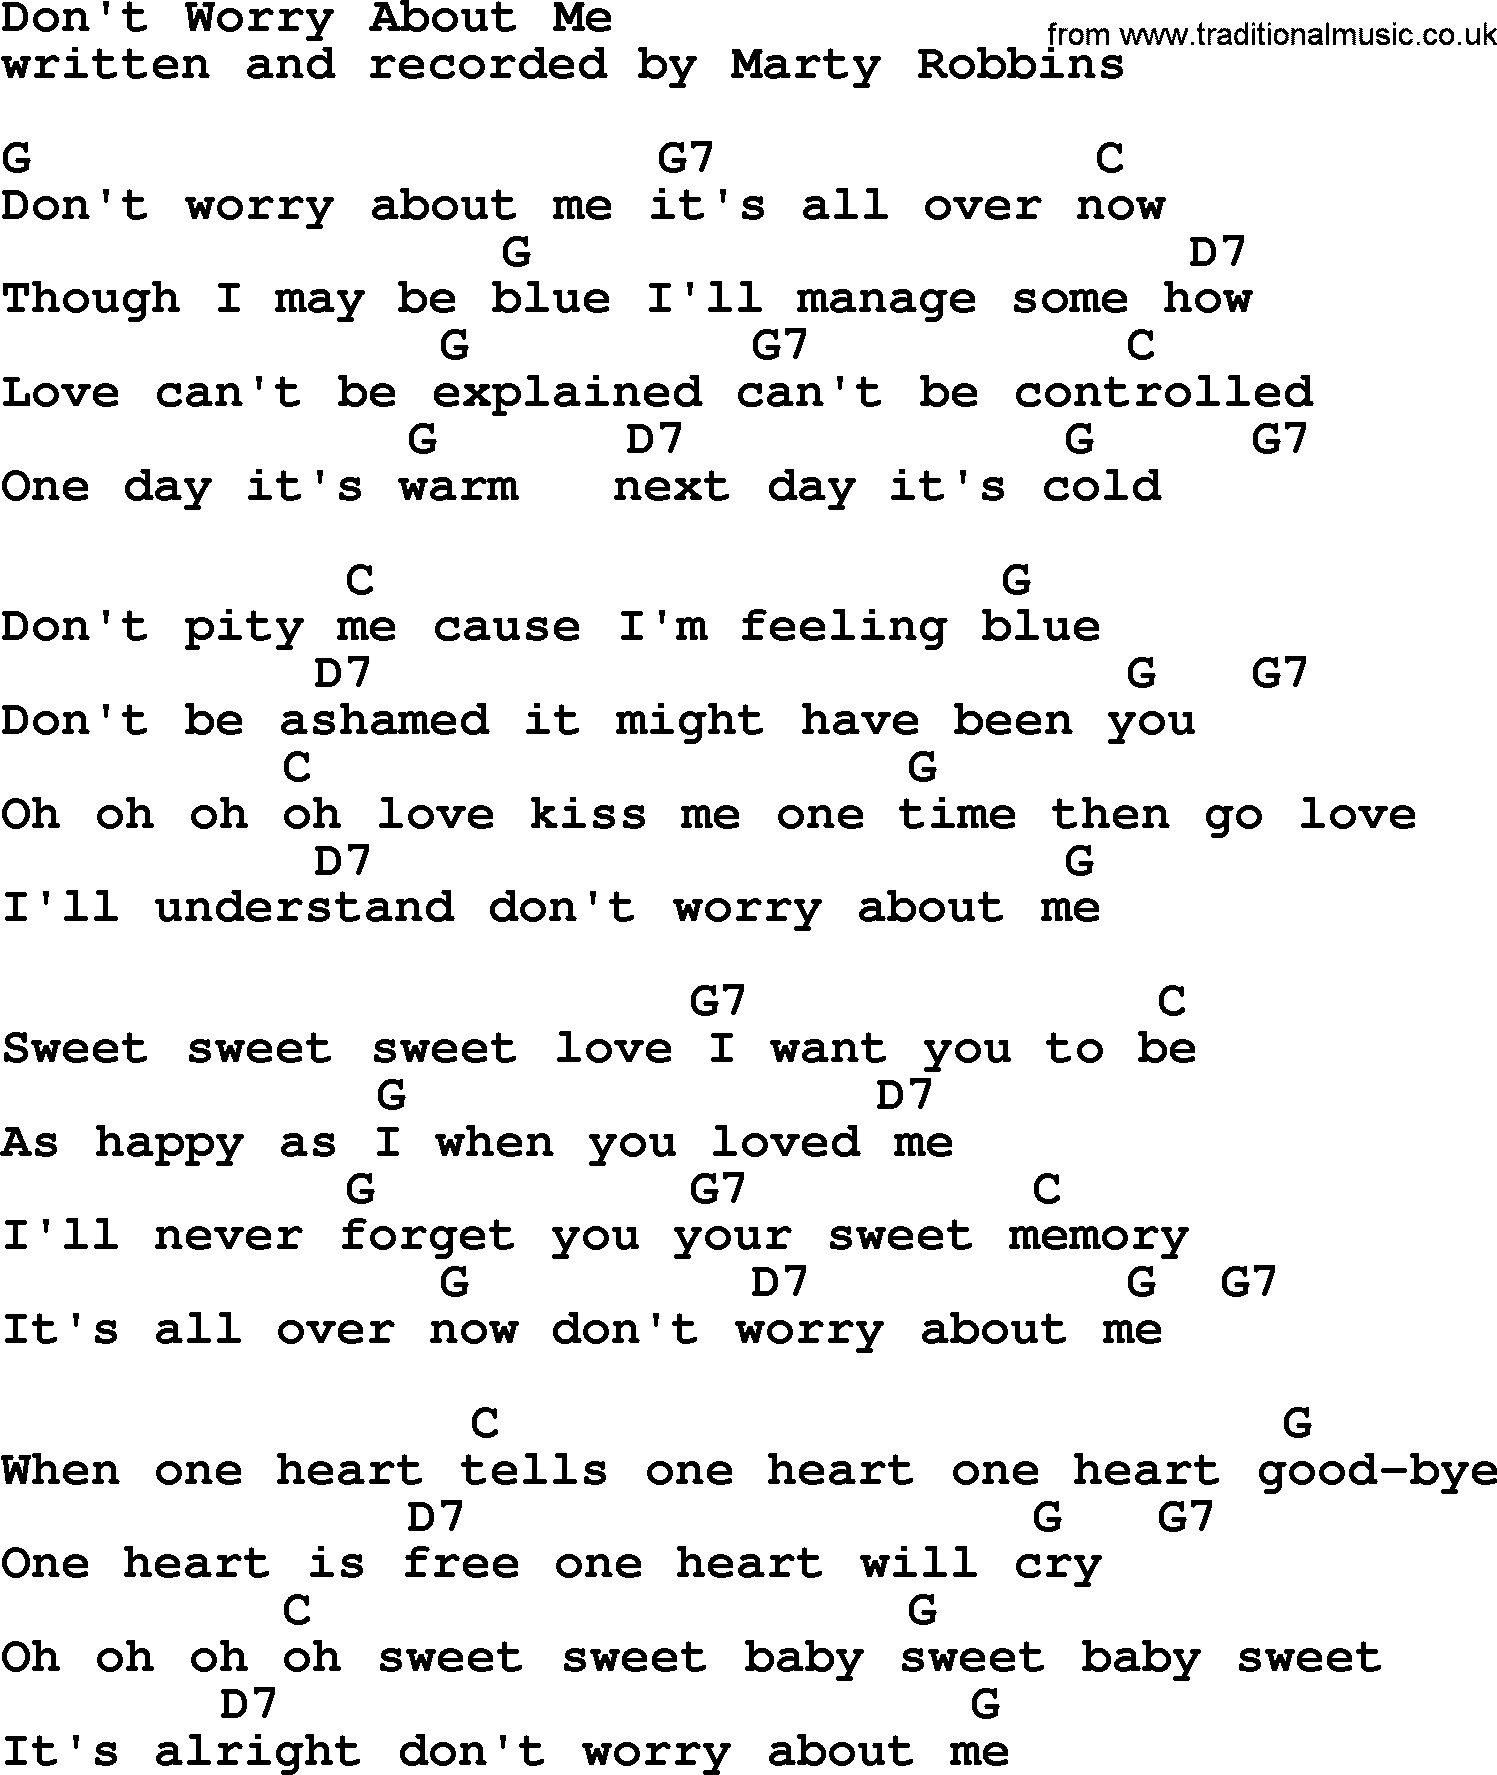 Marty Robbins song: Don't Worry About Me, lyrics and chords